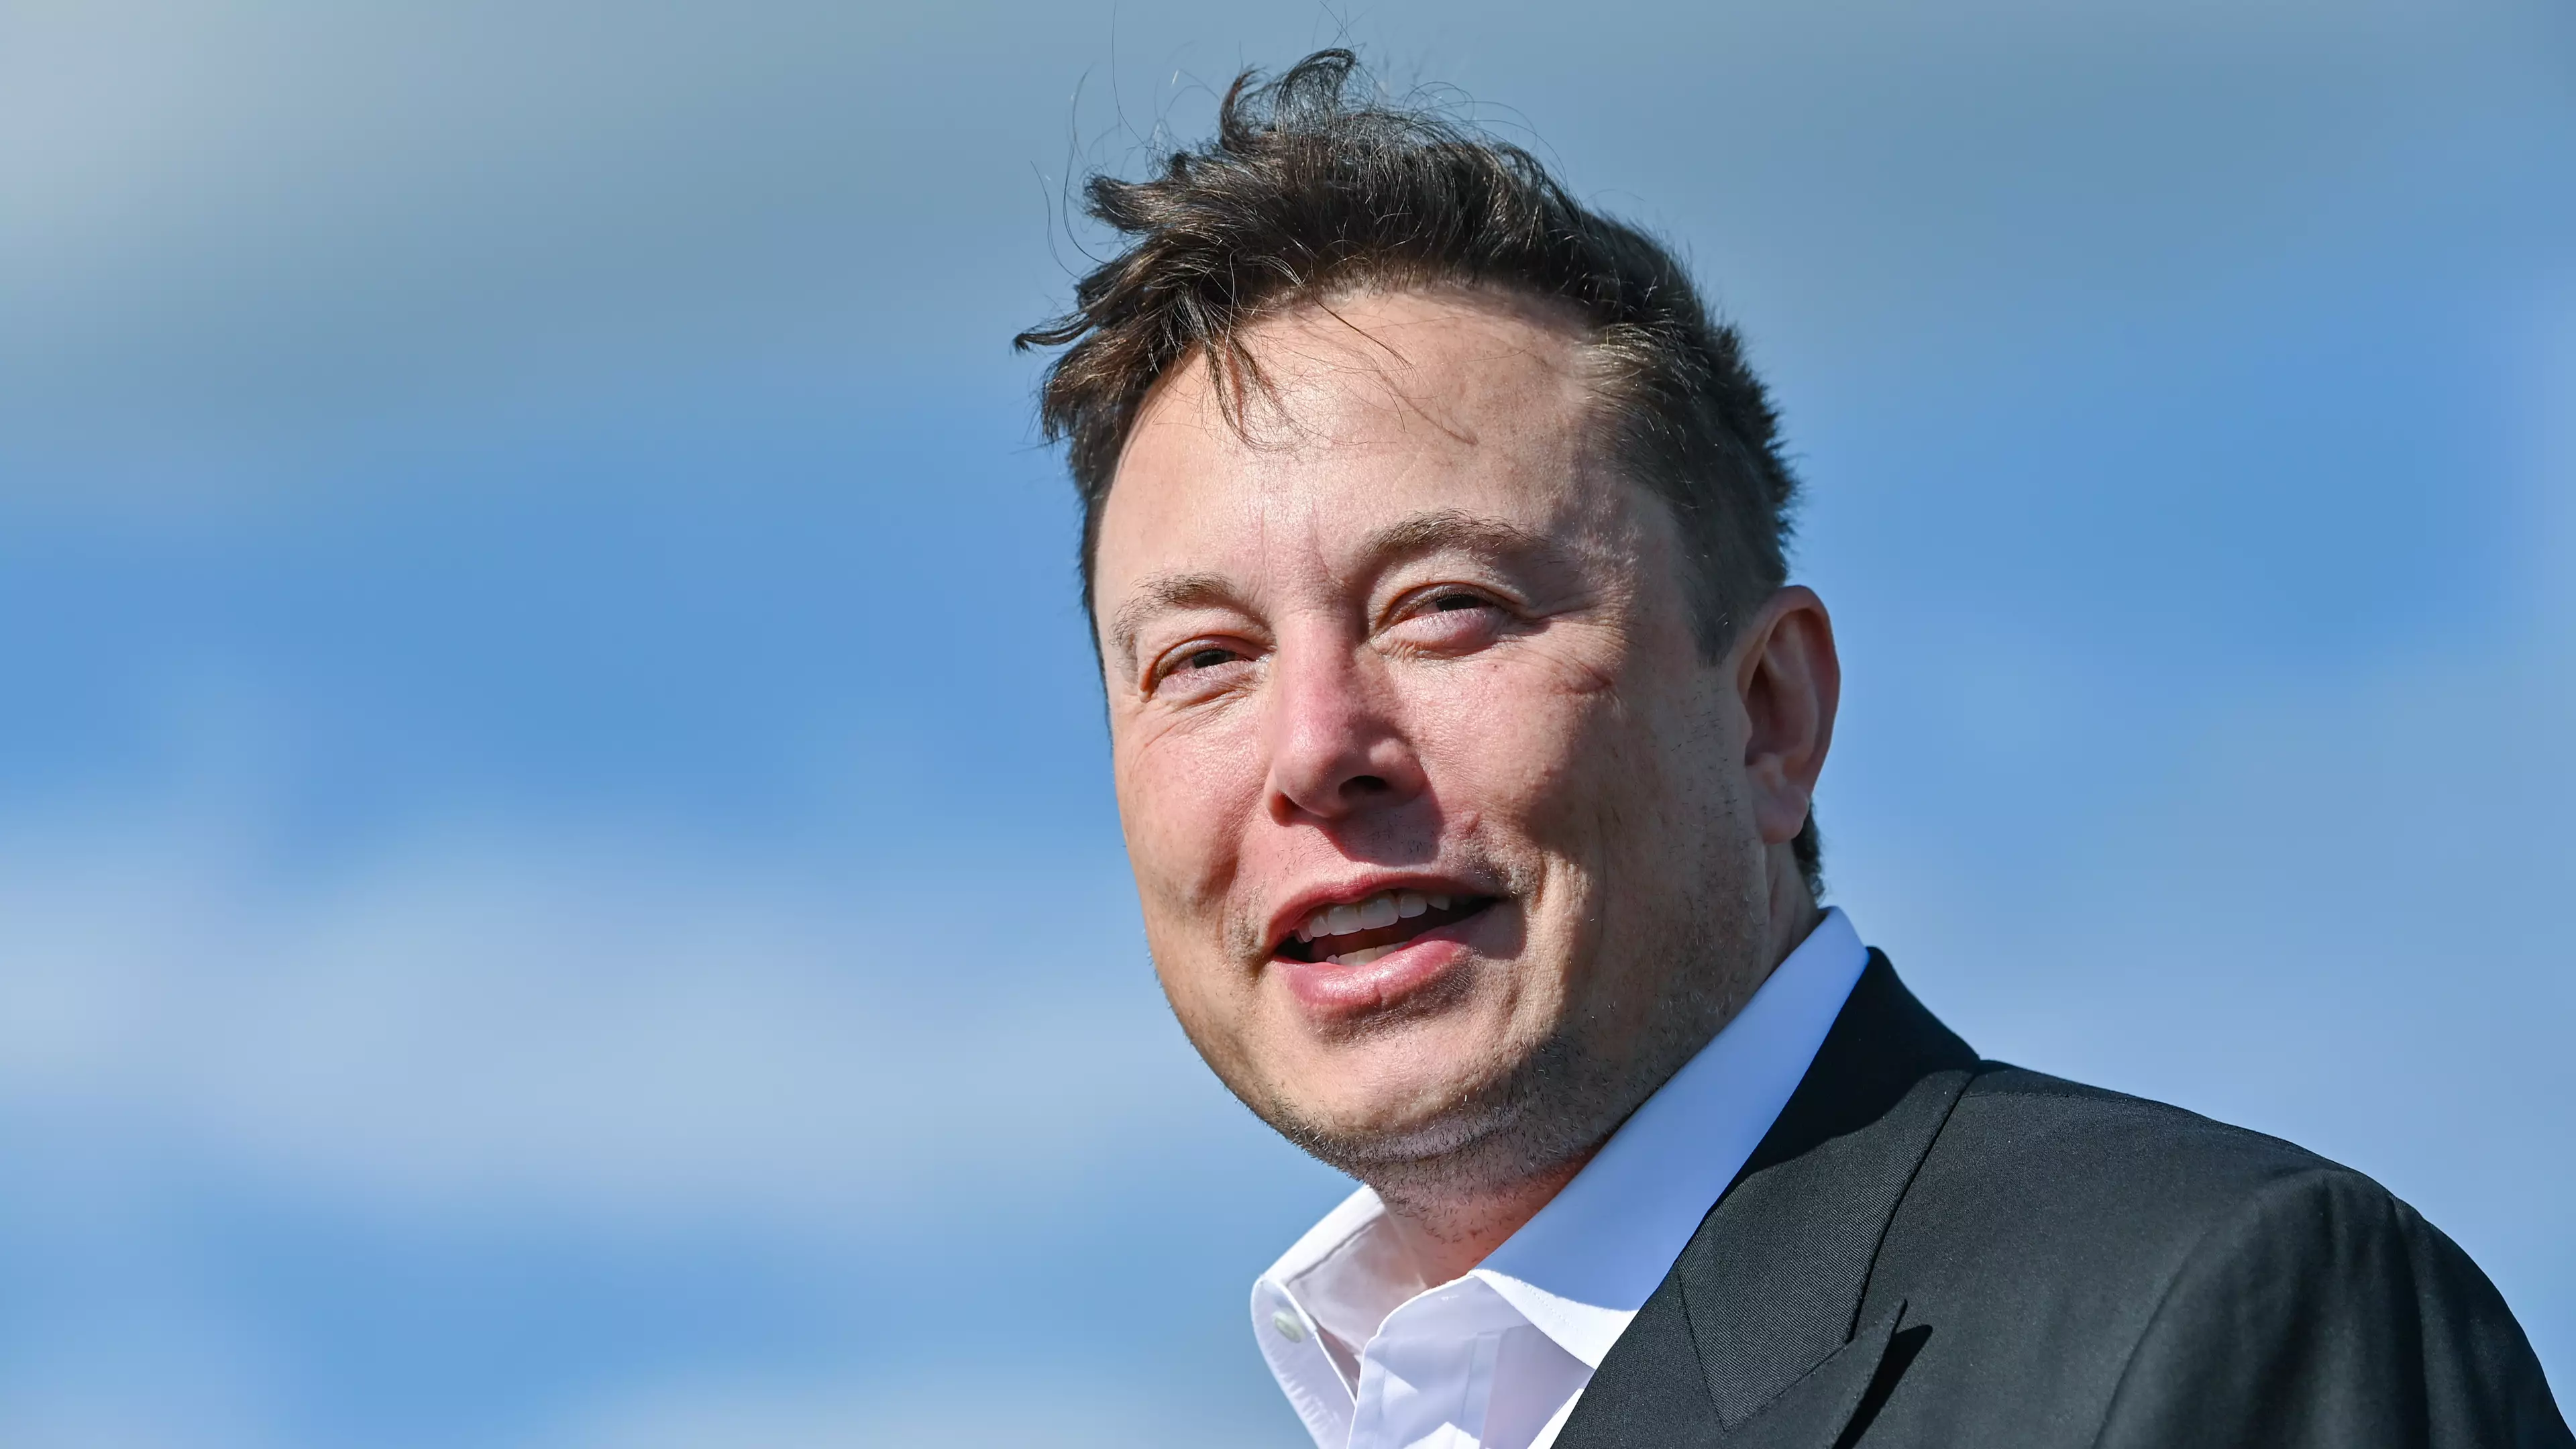 Elon Musk Has Bought Some Dogecoin For His Son X Æ A-Xii